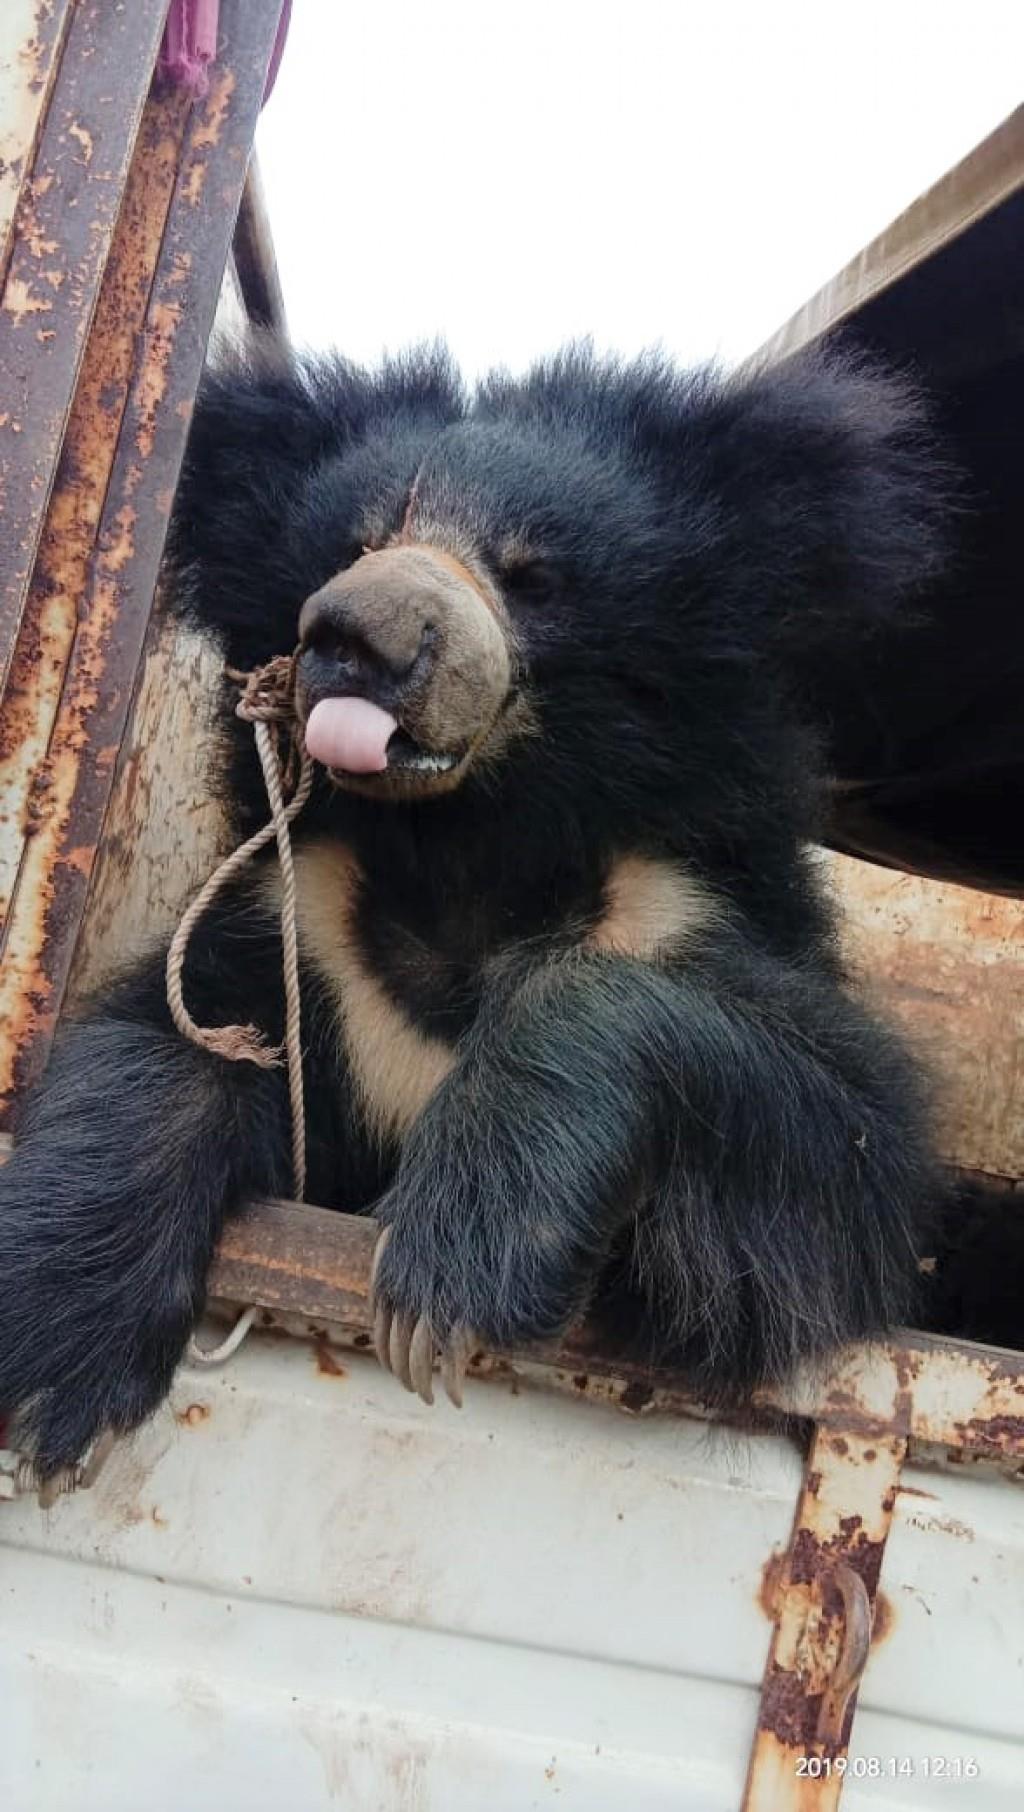 International Animal Rescue: From Dancing Bears To Conservation Crusade